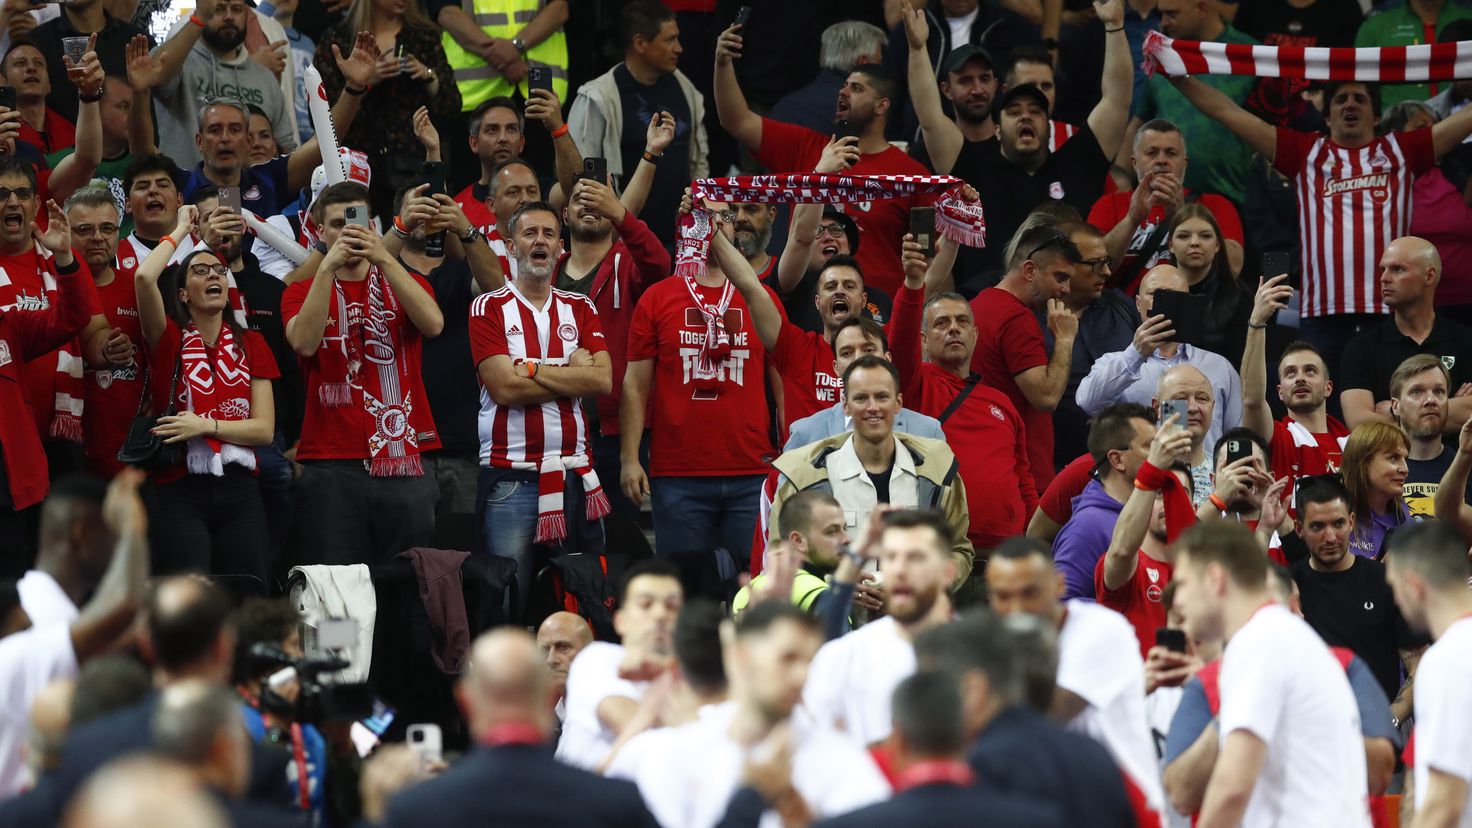 Olympiacos wild comeback: 27-2 in the third quarter
